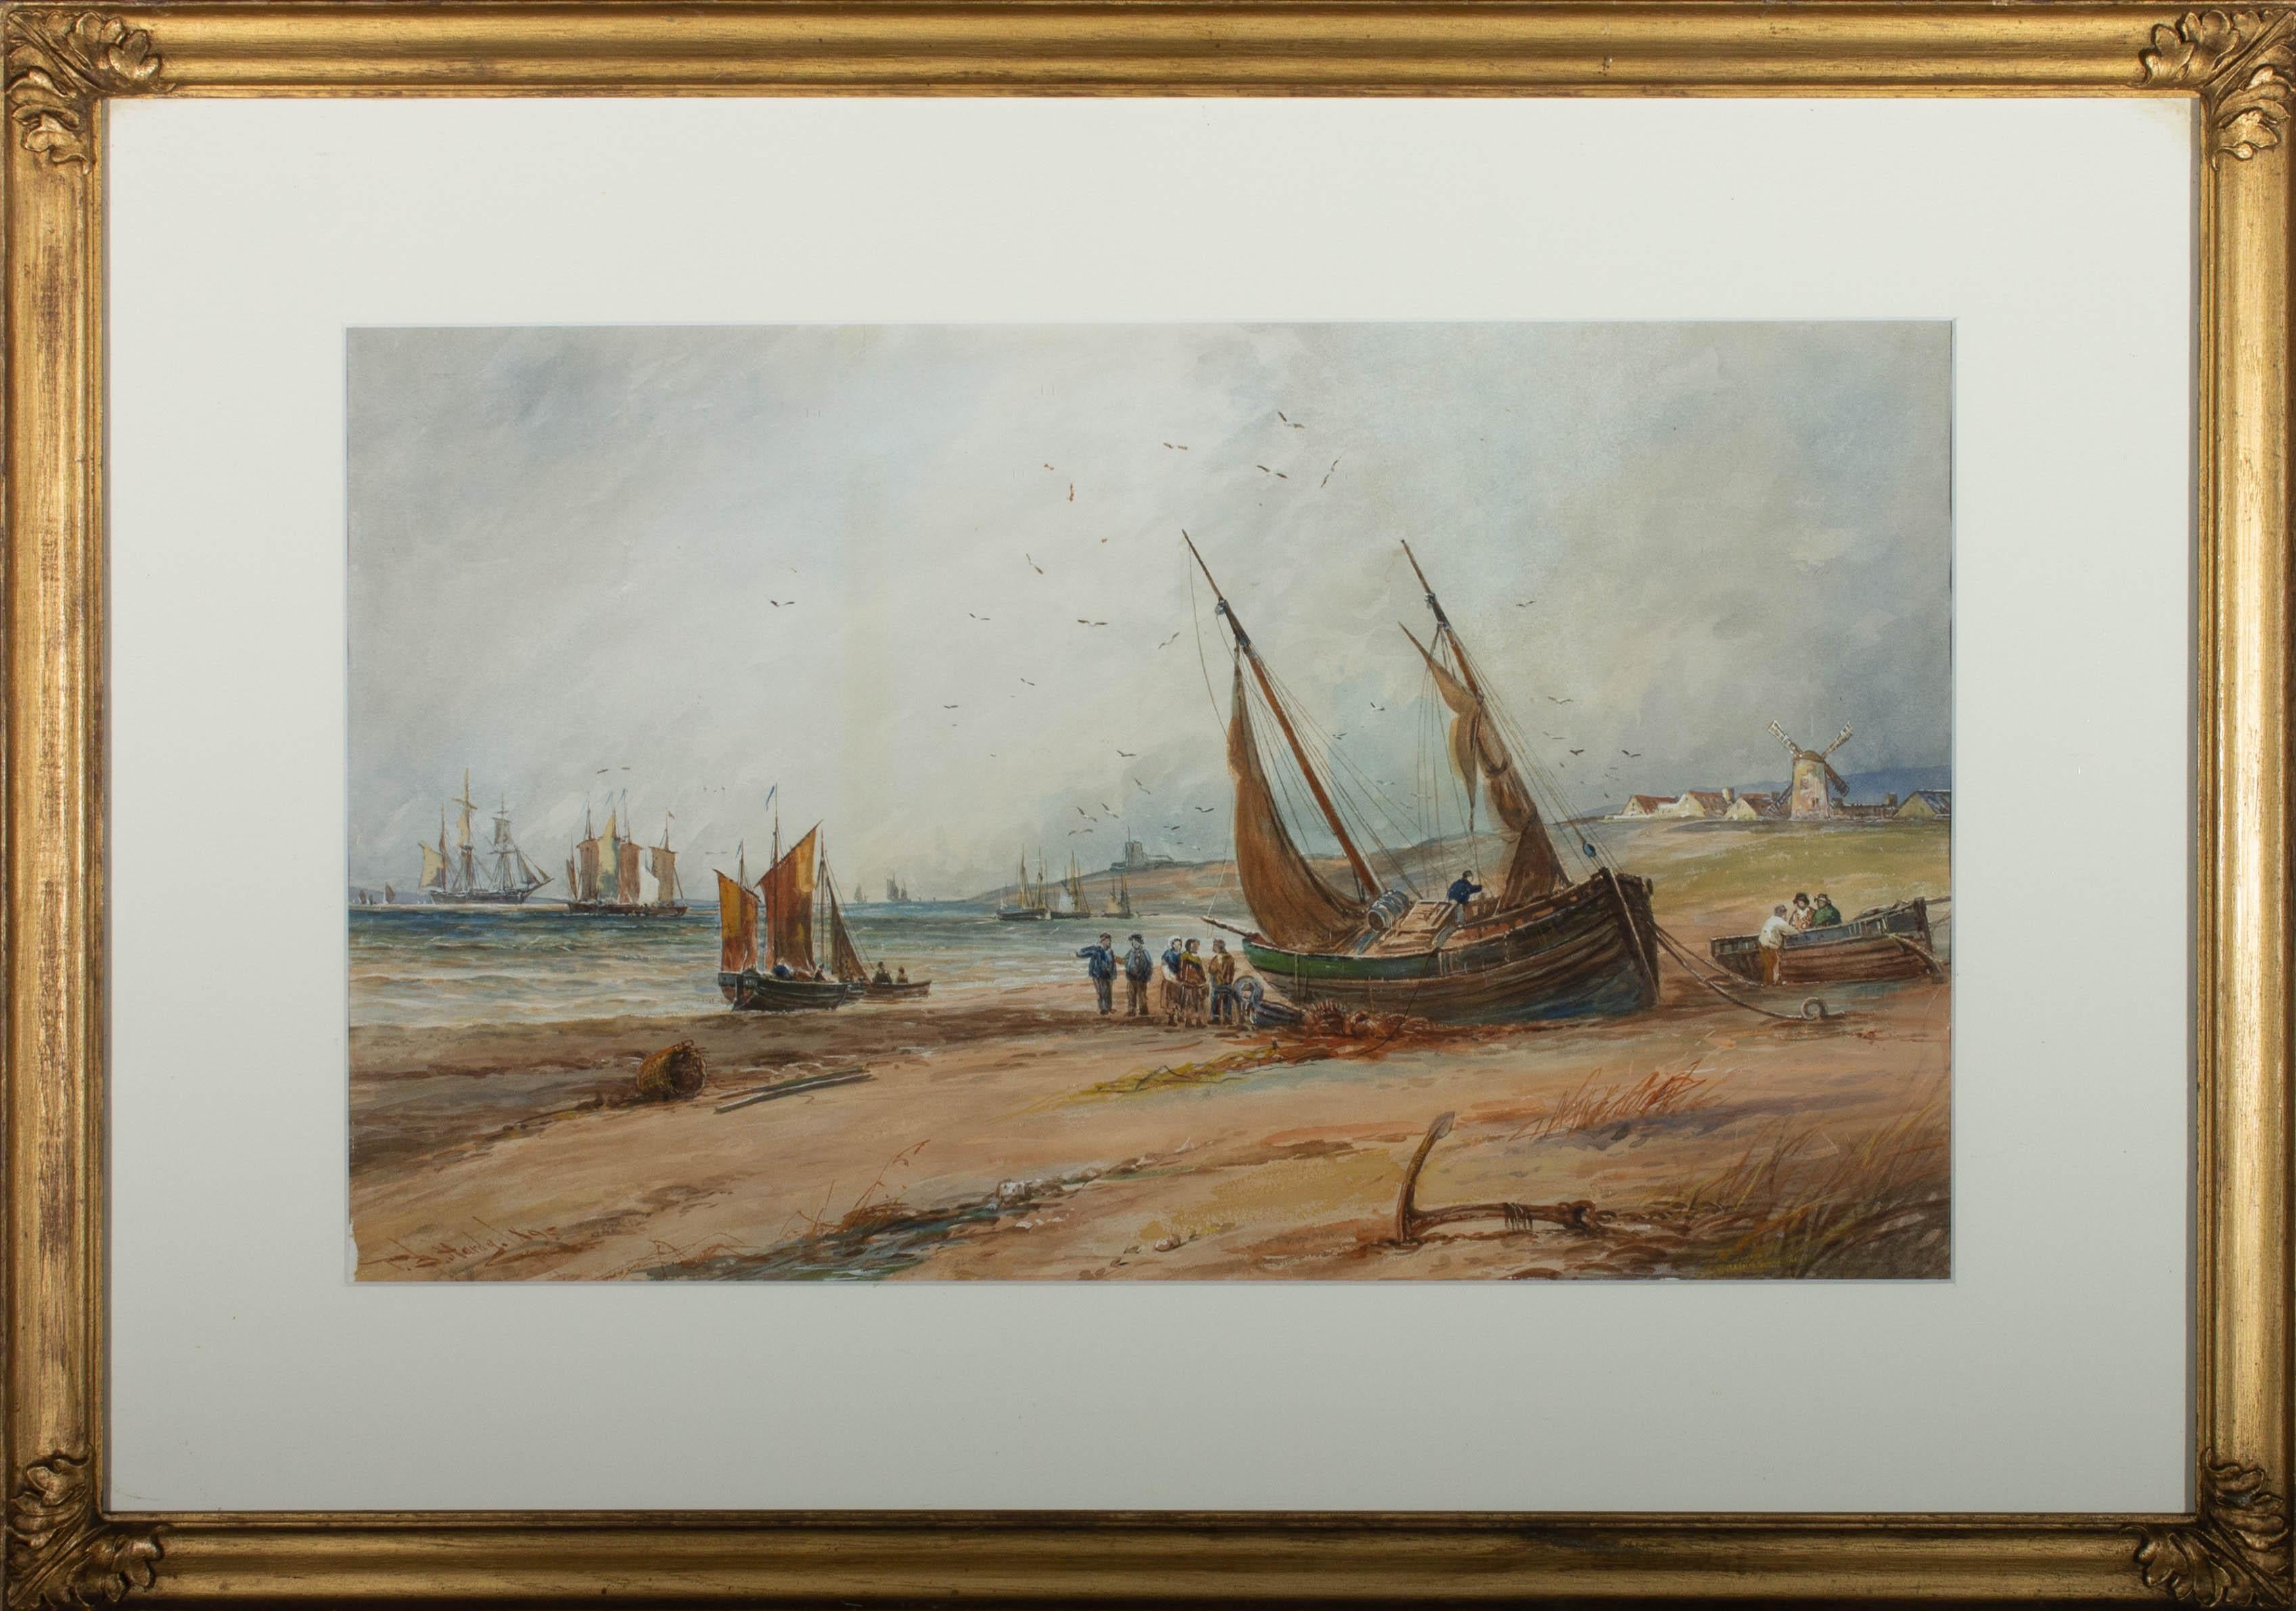 A bustling coastal scene with a beached fishing boat in the foreground and larger ships at sea to the left of the composition. Presented in a clean white mount and a distressed gilt-effect wooden frame with acanthus leaf detailing to the corners.